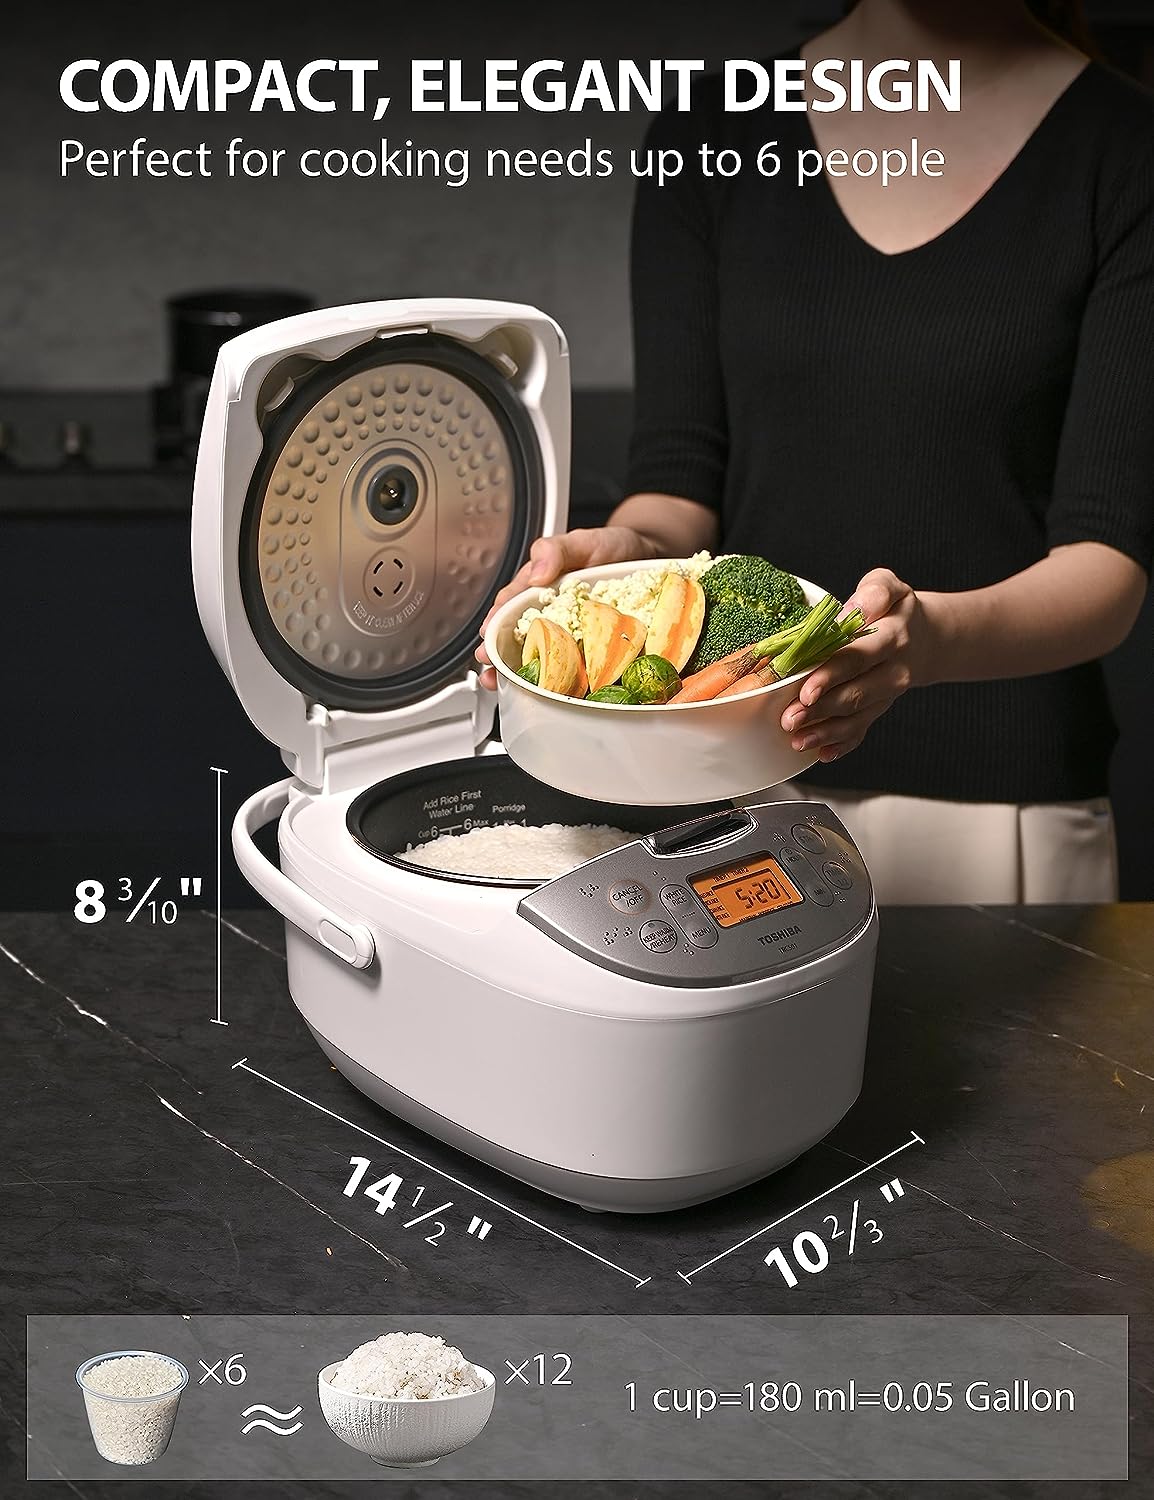 https://bigbigmart.com/wp-content/uploads/2023/08/Toshiba-Rice-Cooker-6-Cup-Uncooked-%E2%80%93-Japanese-Rice-Cooker-with-Fuzzy-Logic-Technology-7-Cooking-Functions-Digital-Display-2-Delay-Timers-and-Auto-Keep-Warm-Non-Stick-Inner-Pot-White1.jpg